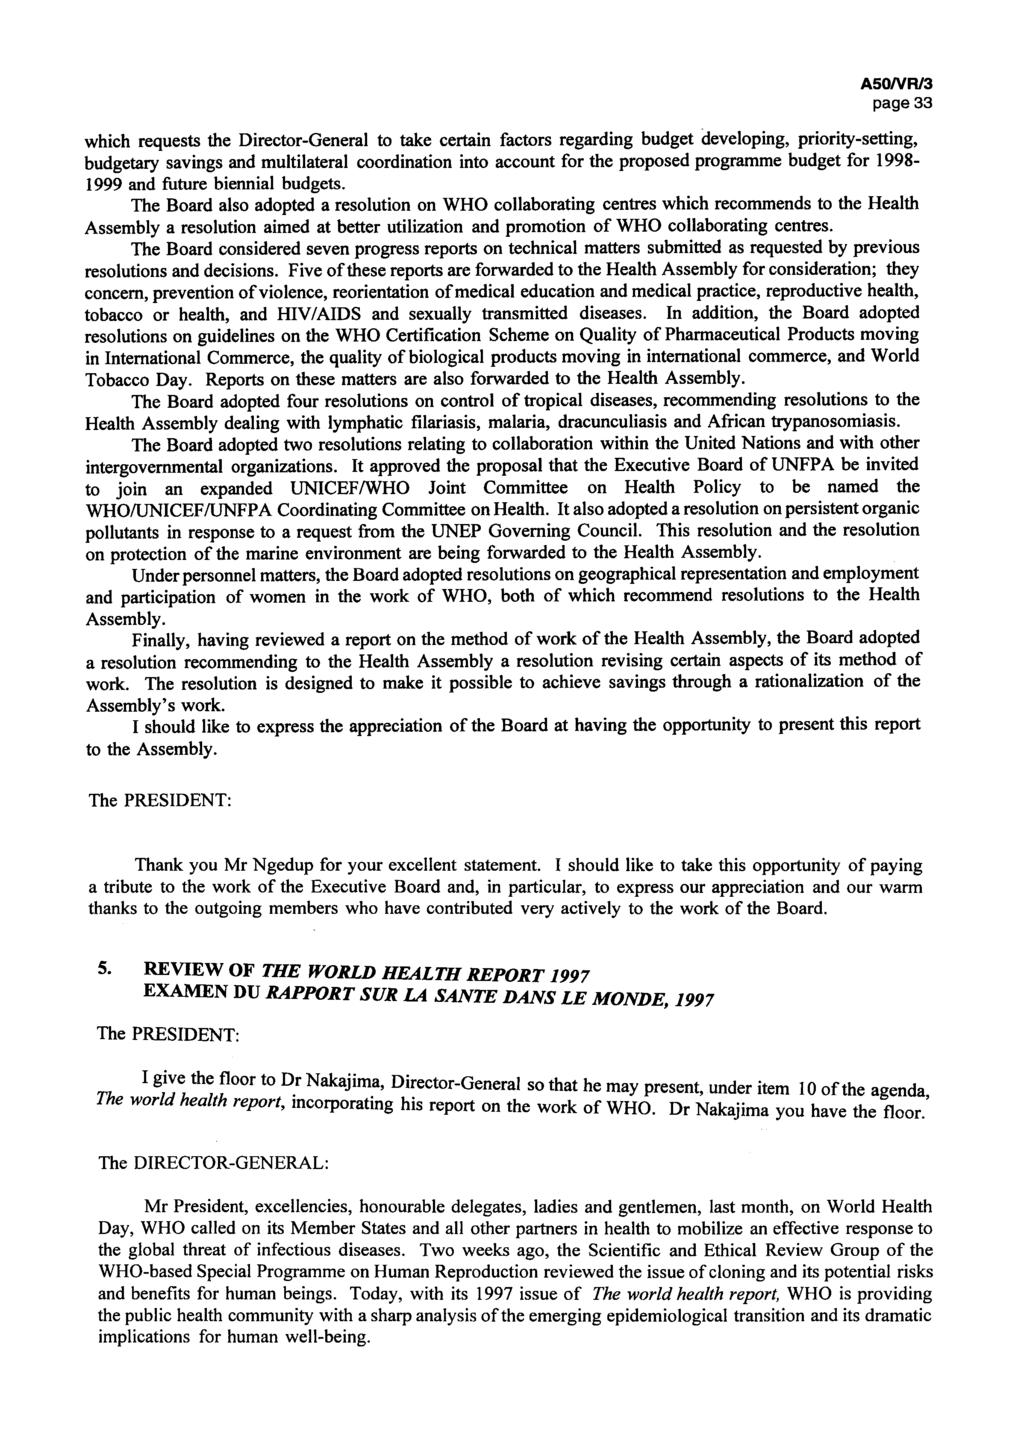 A50/VR/3 page 33 which requests the Director-General to take certain factors regarding budget developing, priority-setting, budgetary savings and multilateral coordination into account for the